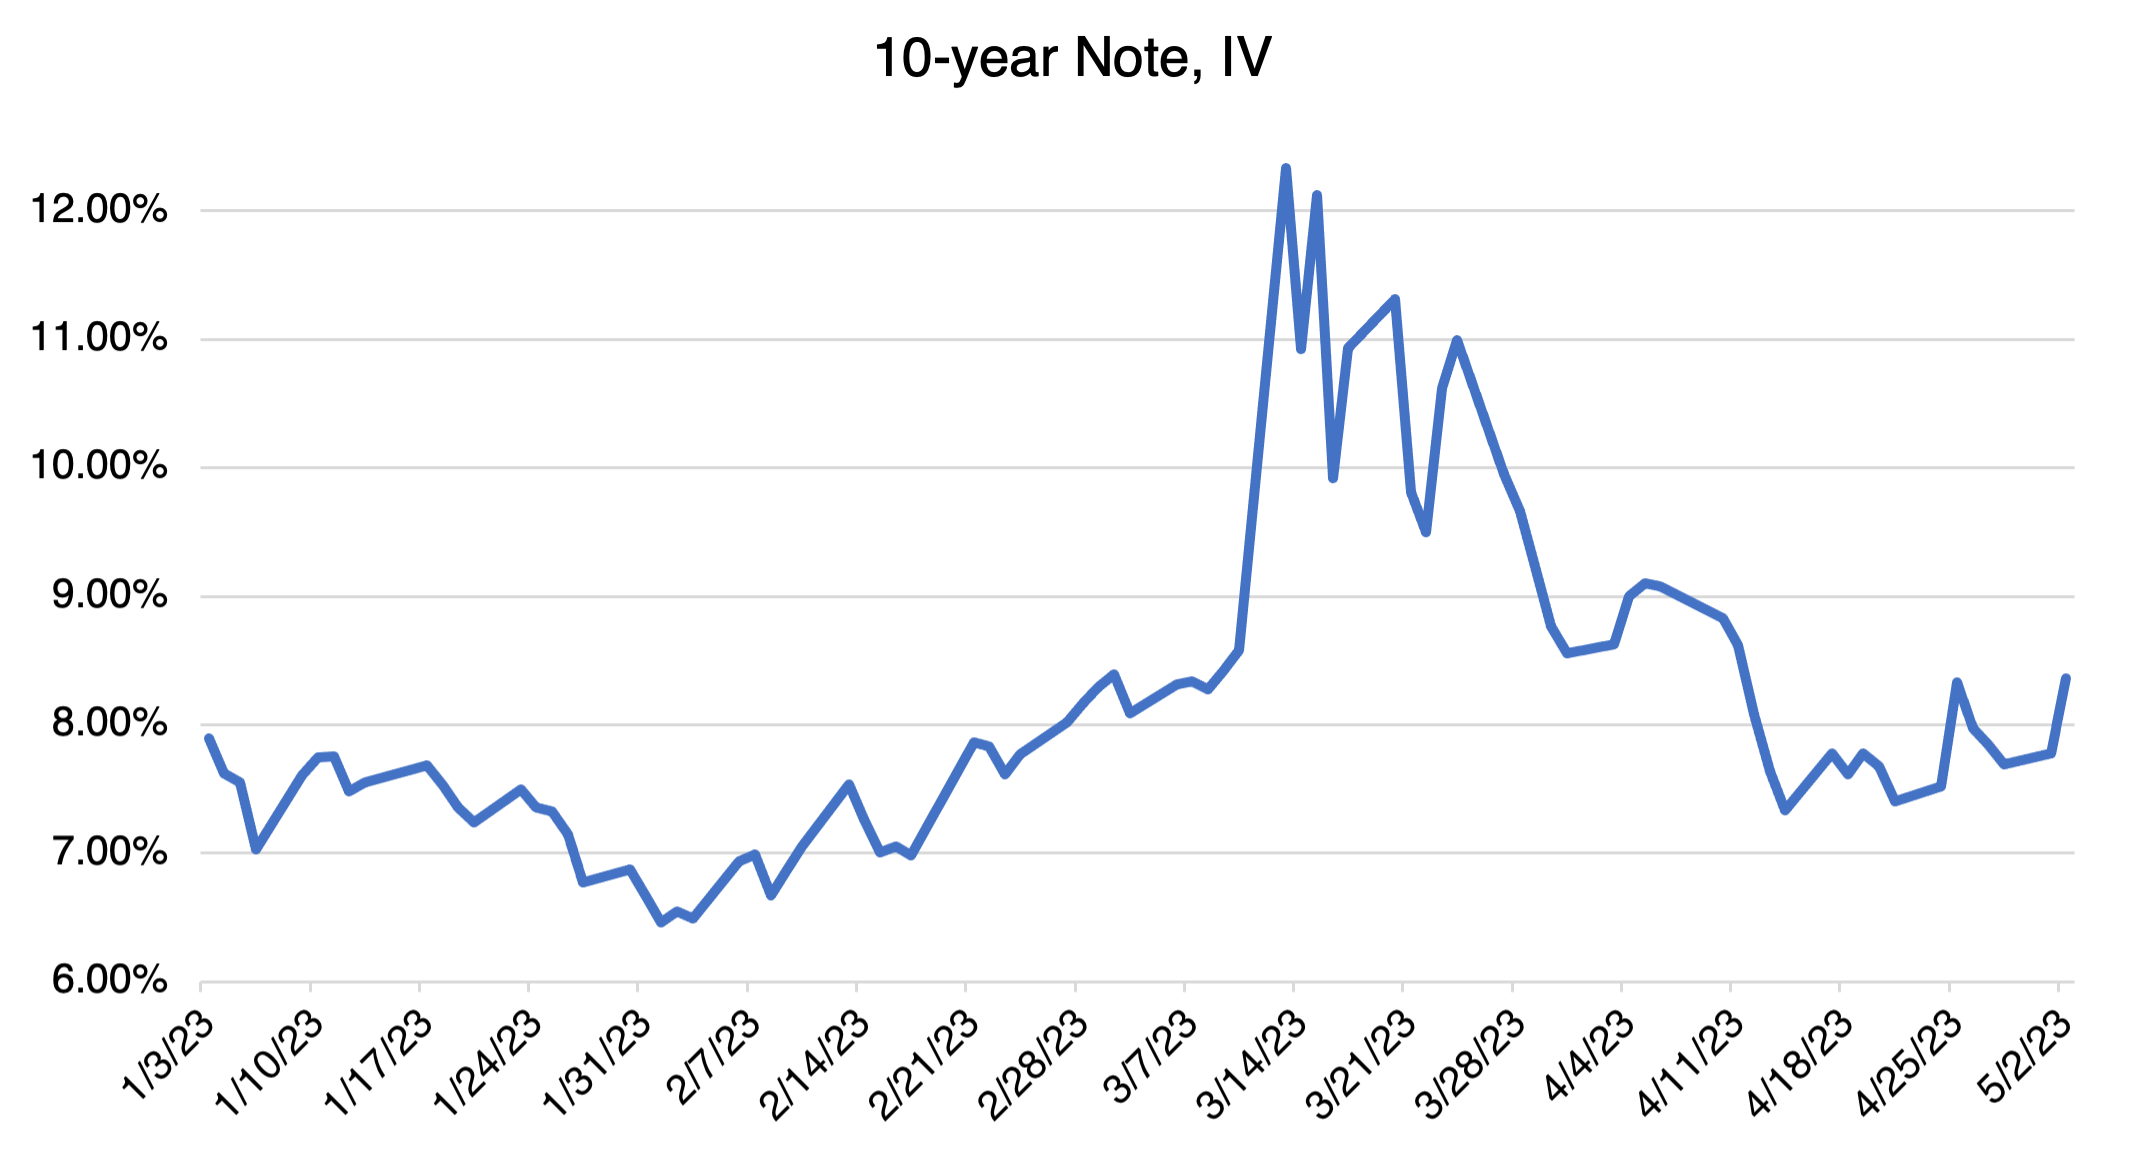 10-year note IV